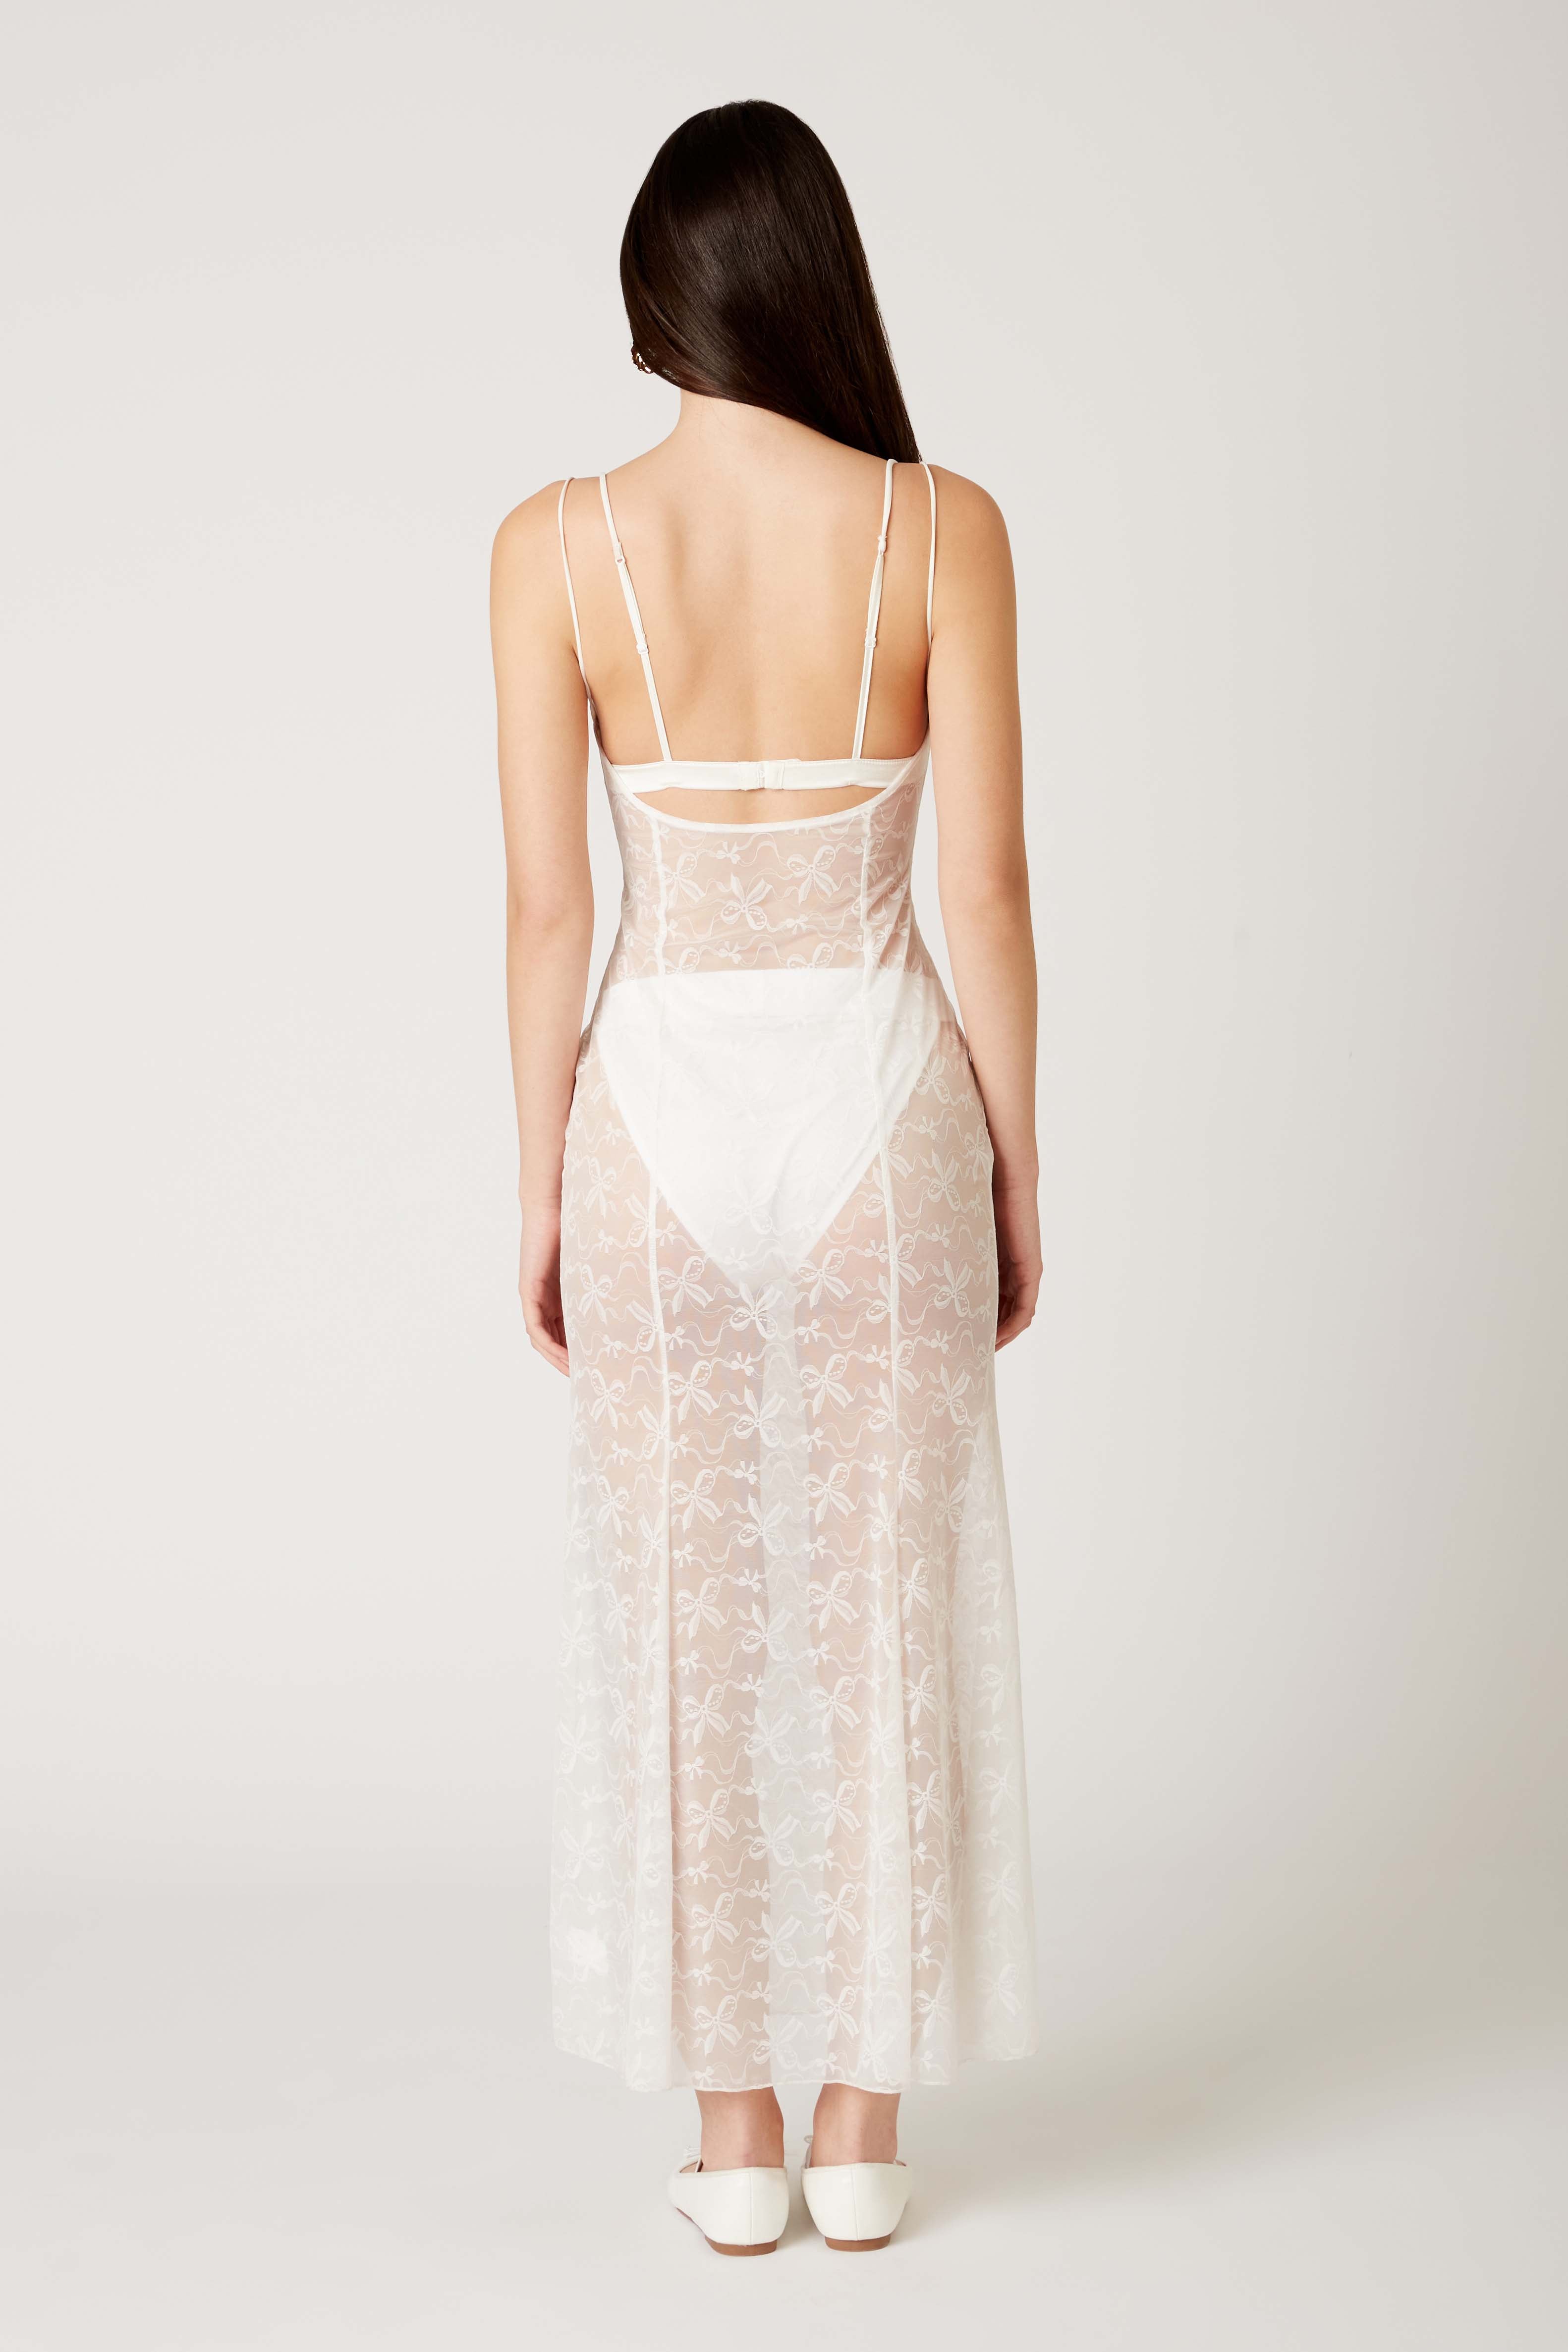 Lace Maxi Dress in white back view